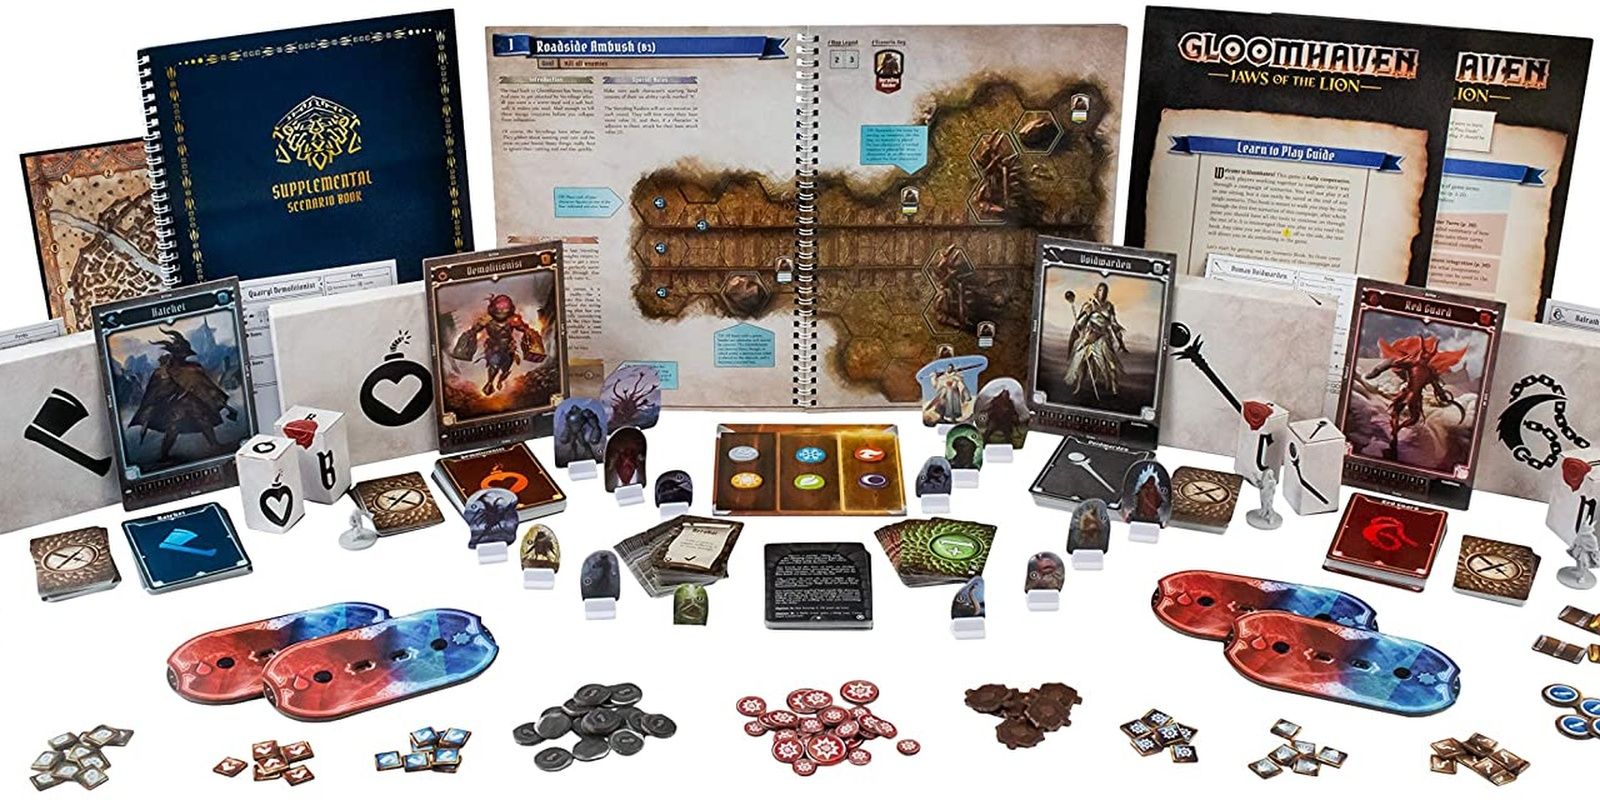 Gloomhaven Jaws Of The Lion Board Game Components In The Box